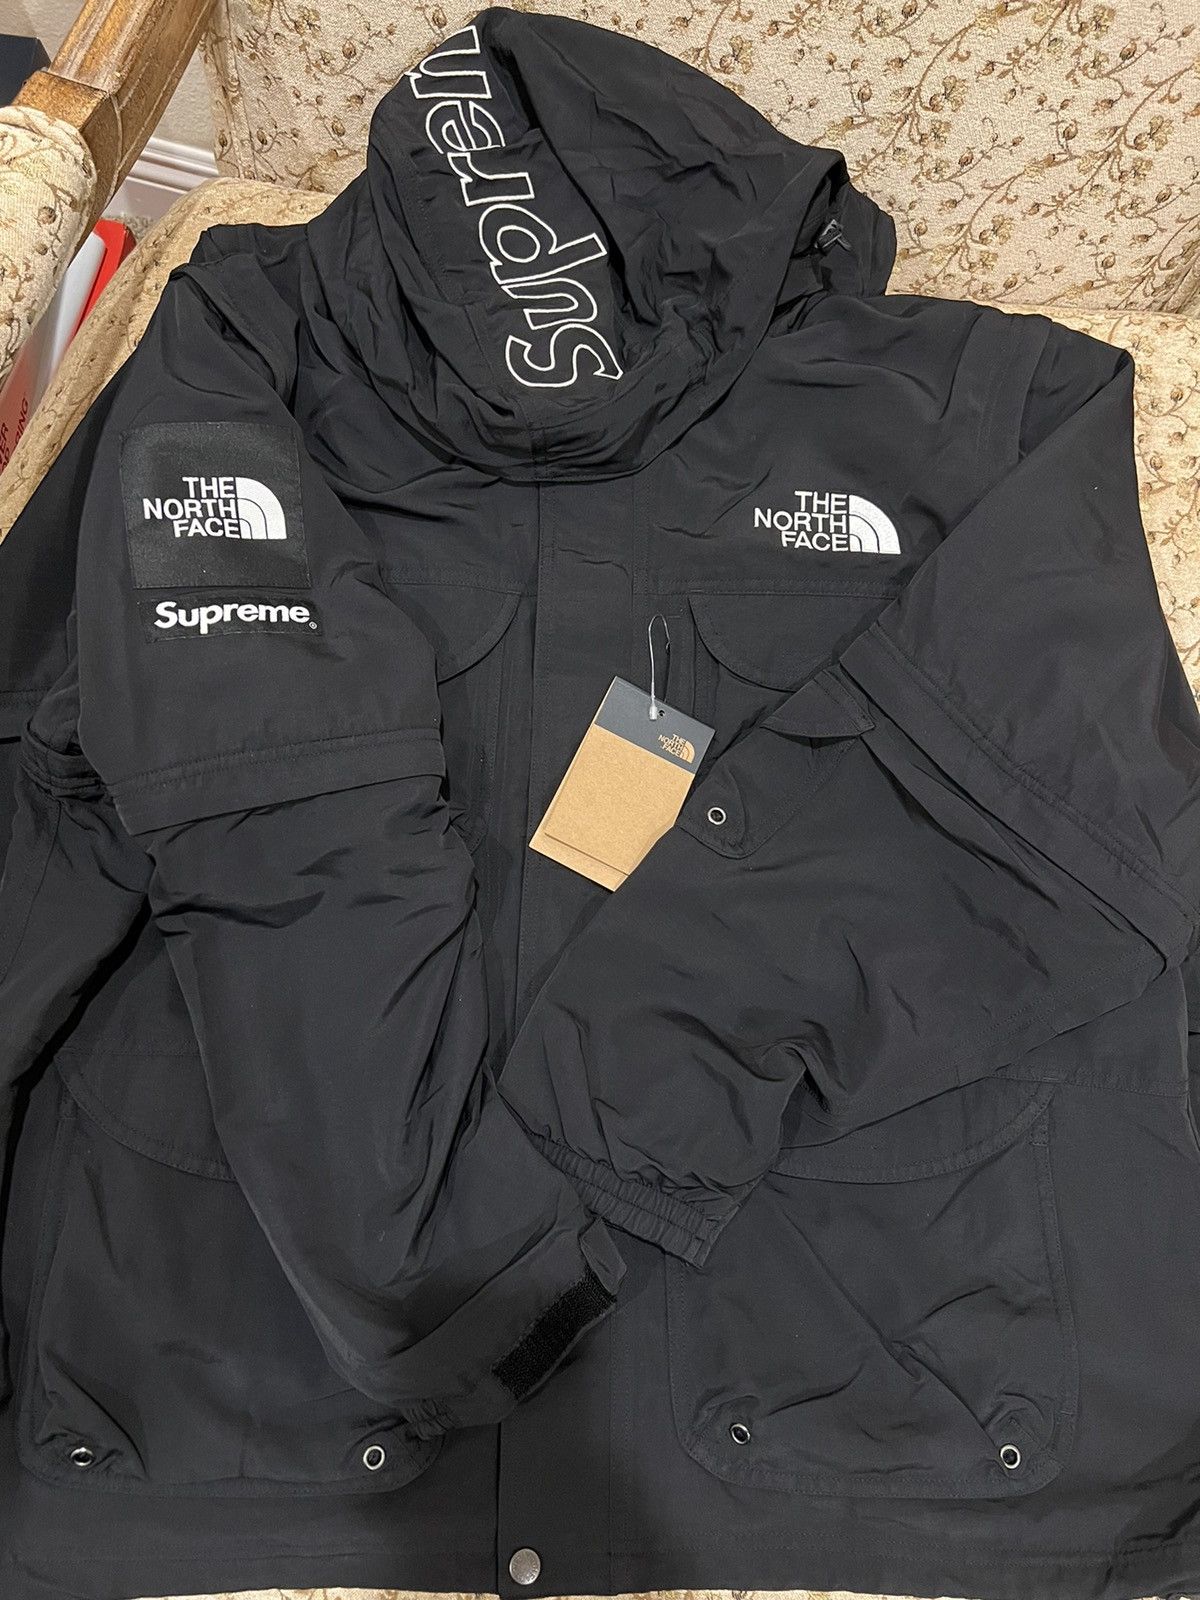 Supreme Supreme the north face trekking convertible jacket | Grailed